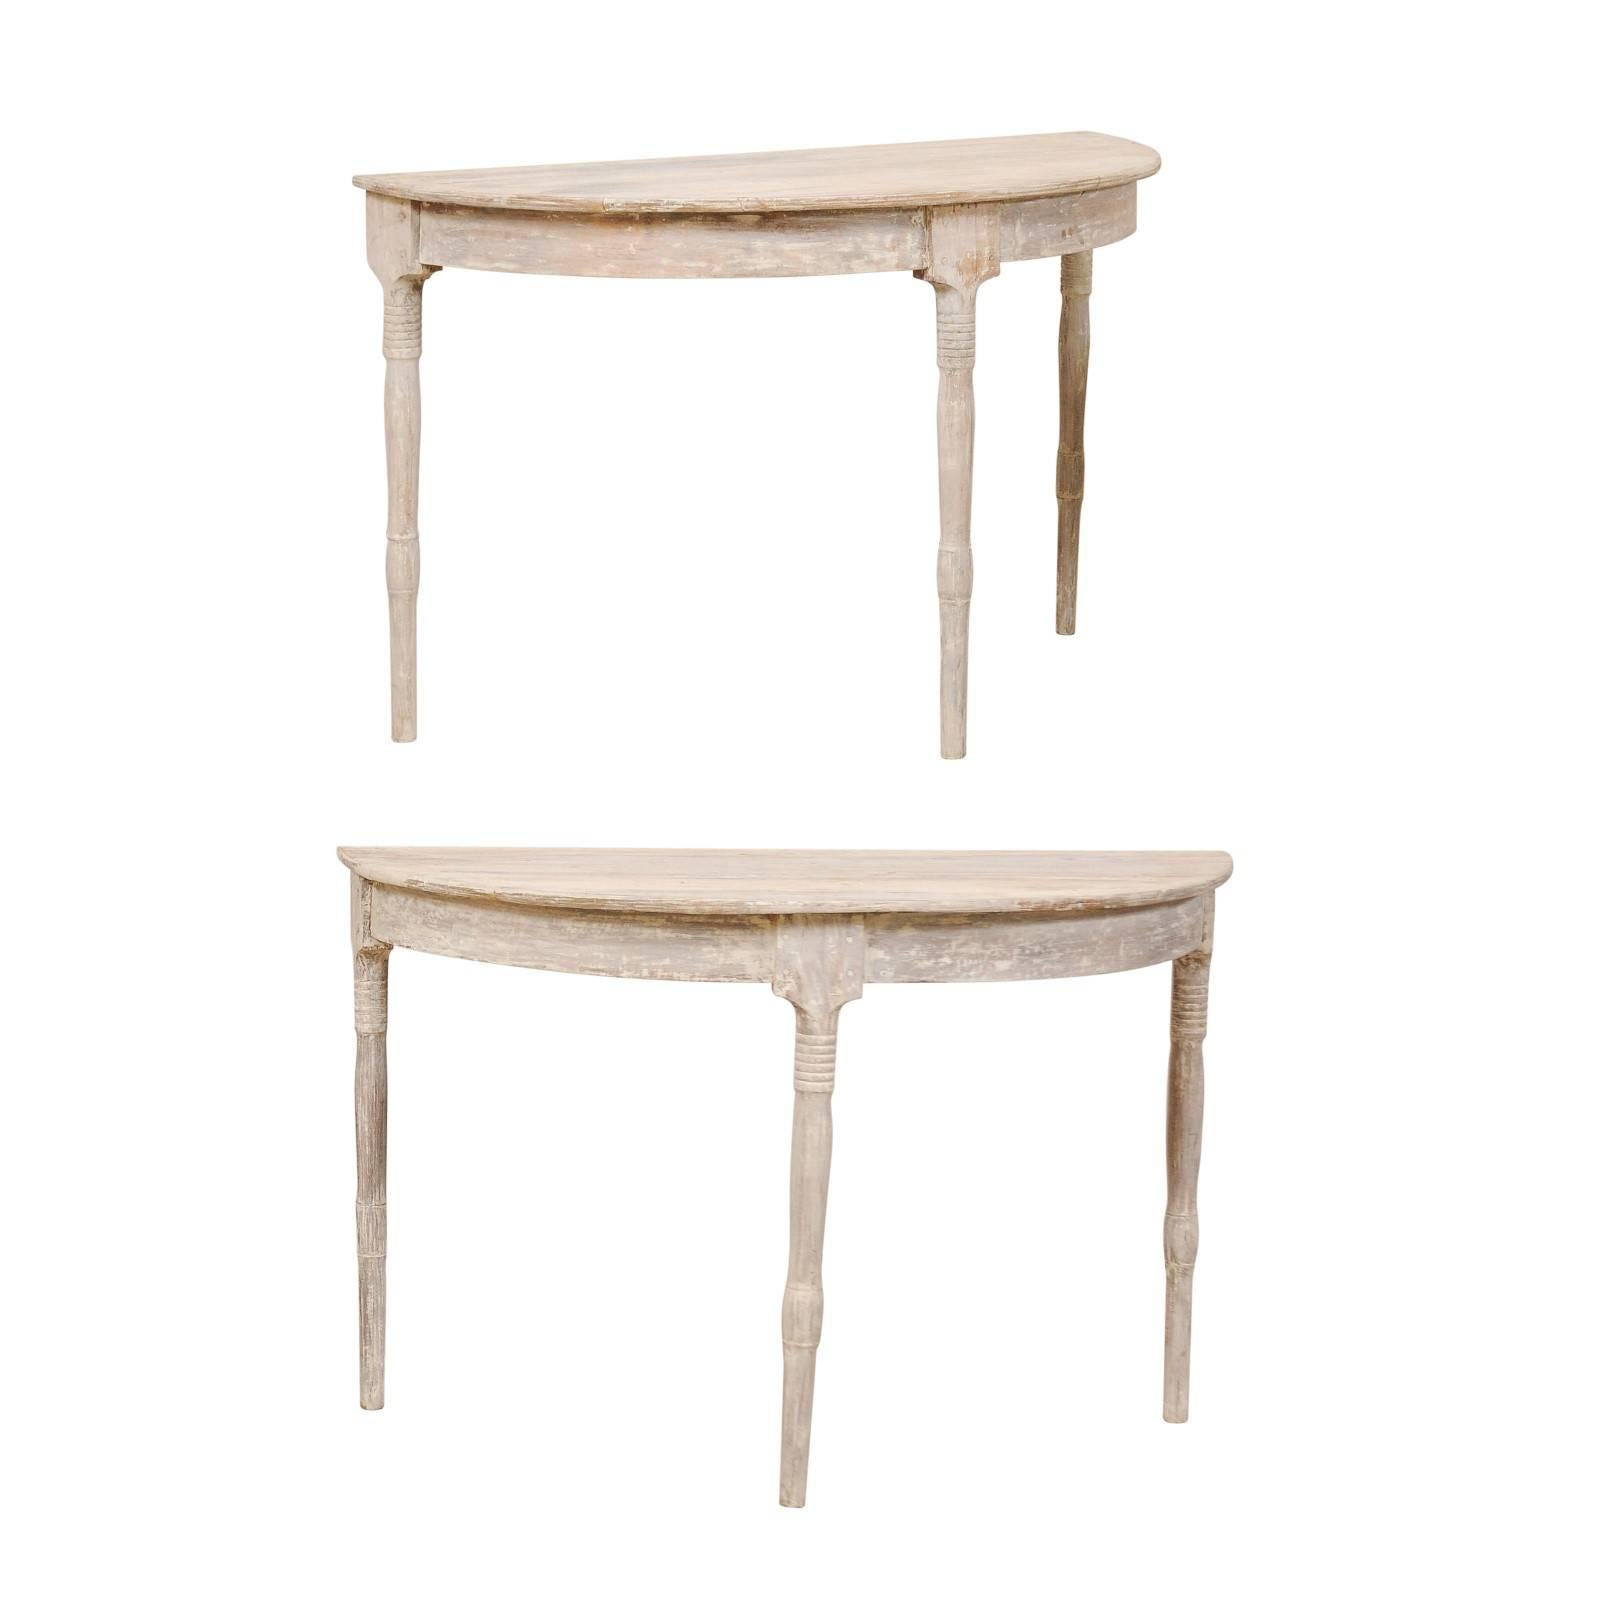 Pair of 19th Century Swedish Demilune Tables in Pale Grey and White Hues